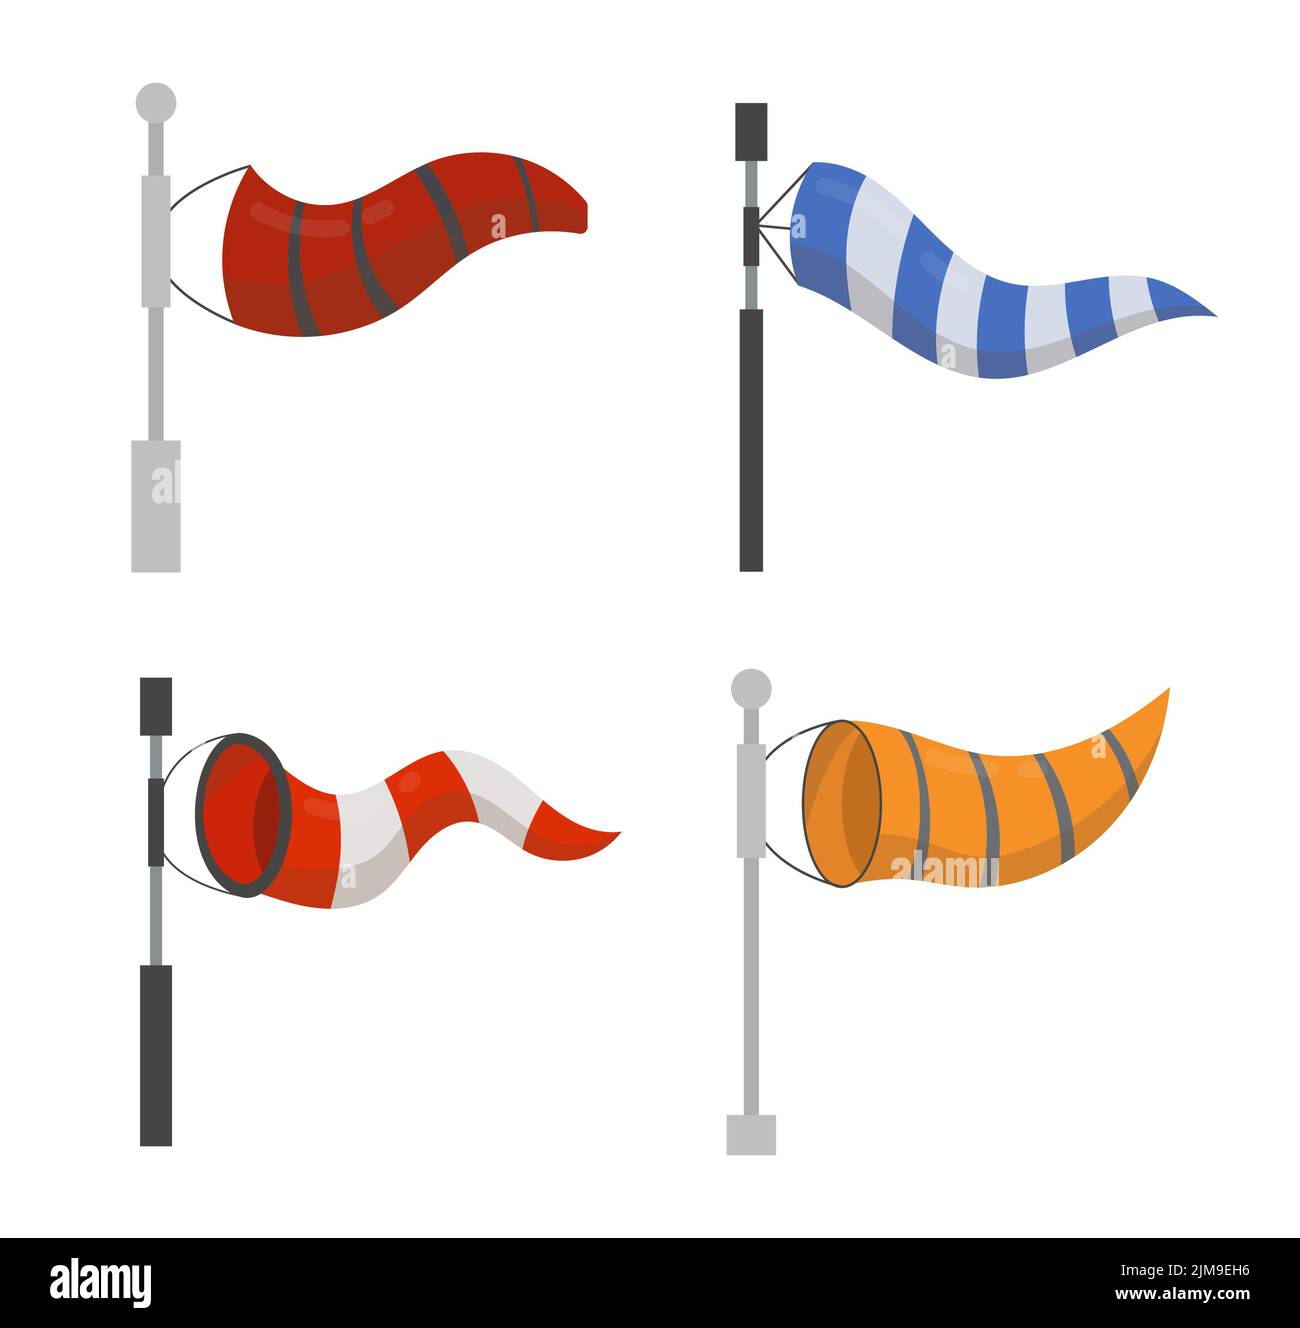 Different windsocks cartoon illustration set. Striped air sleeve or cone for indicating wind direction and velocity or speed on white background. Weat Stock Vector